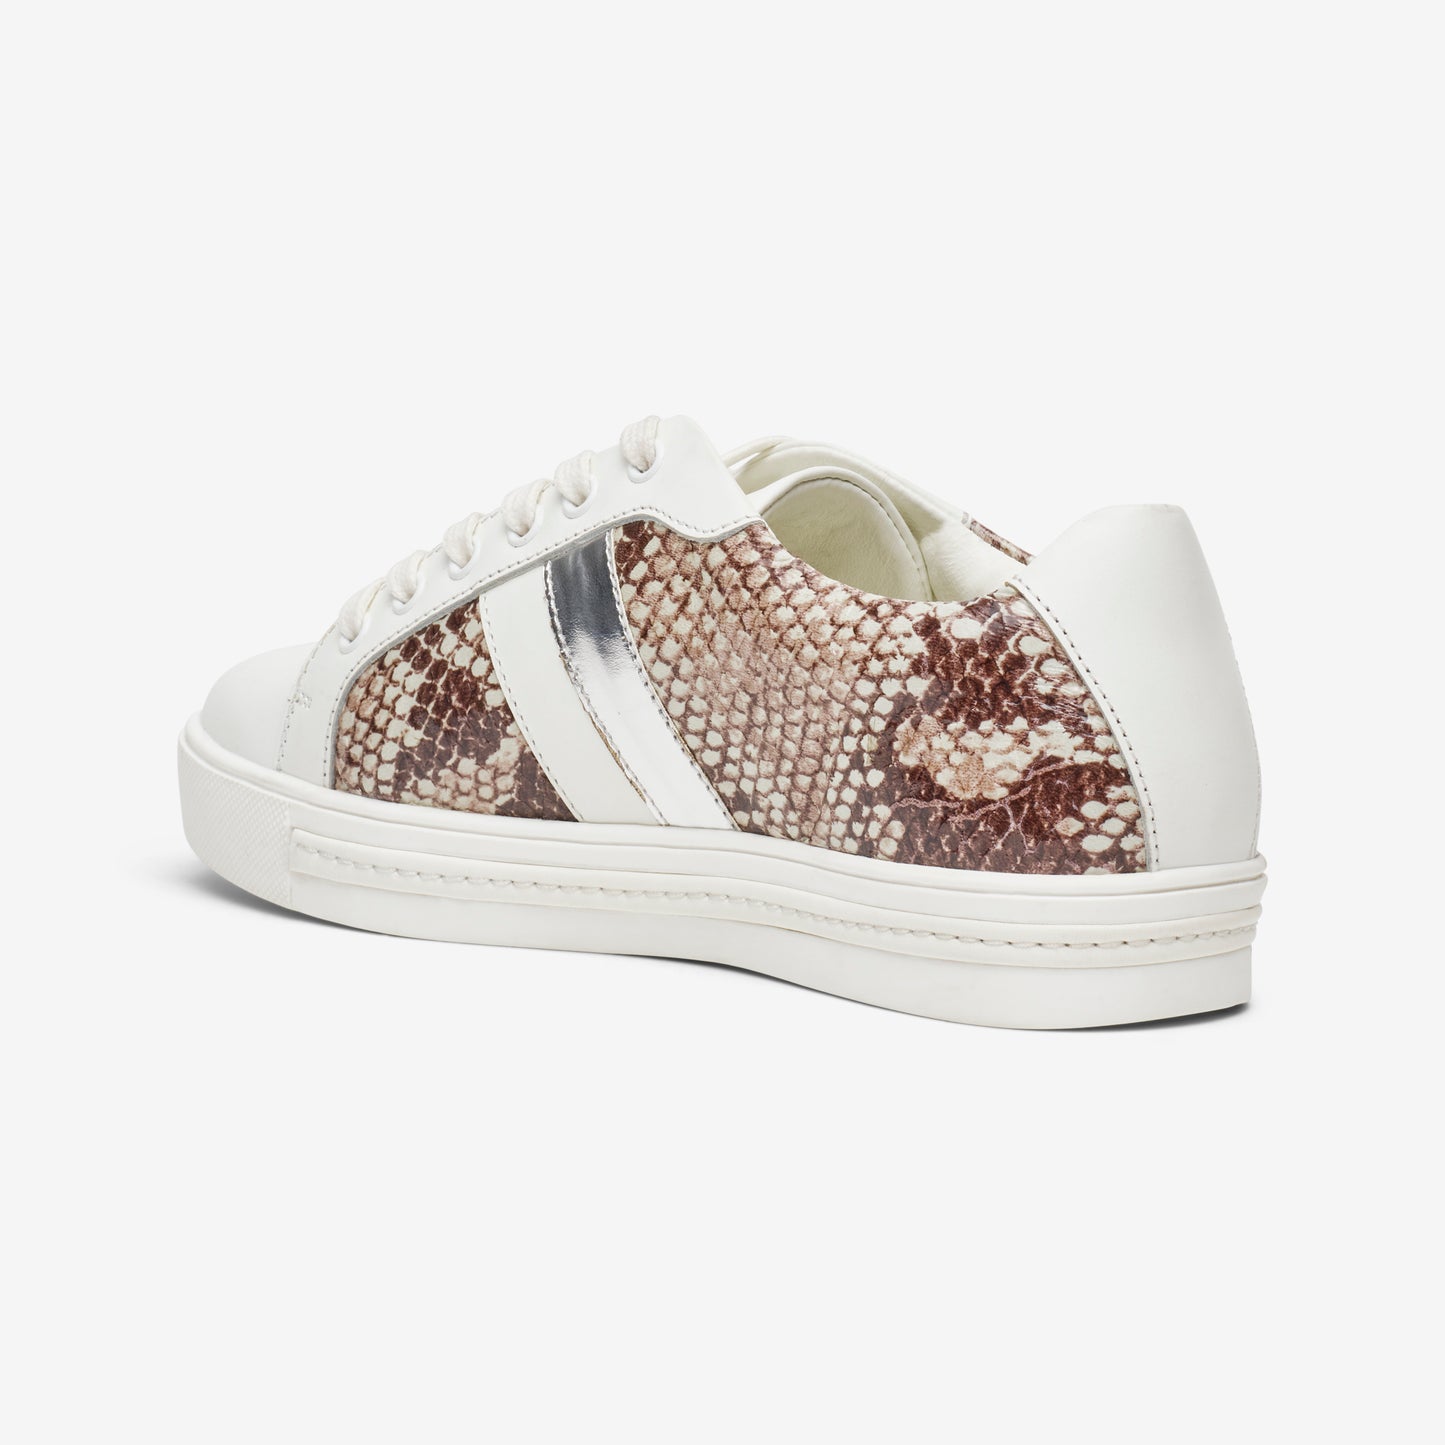 BACK VIEW OF WHITE LEATHER LACE UP TRAINER WITH SNAKE PANEL